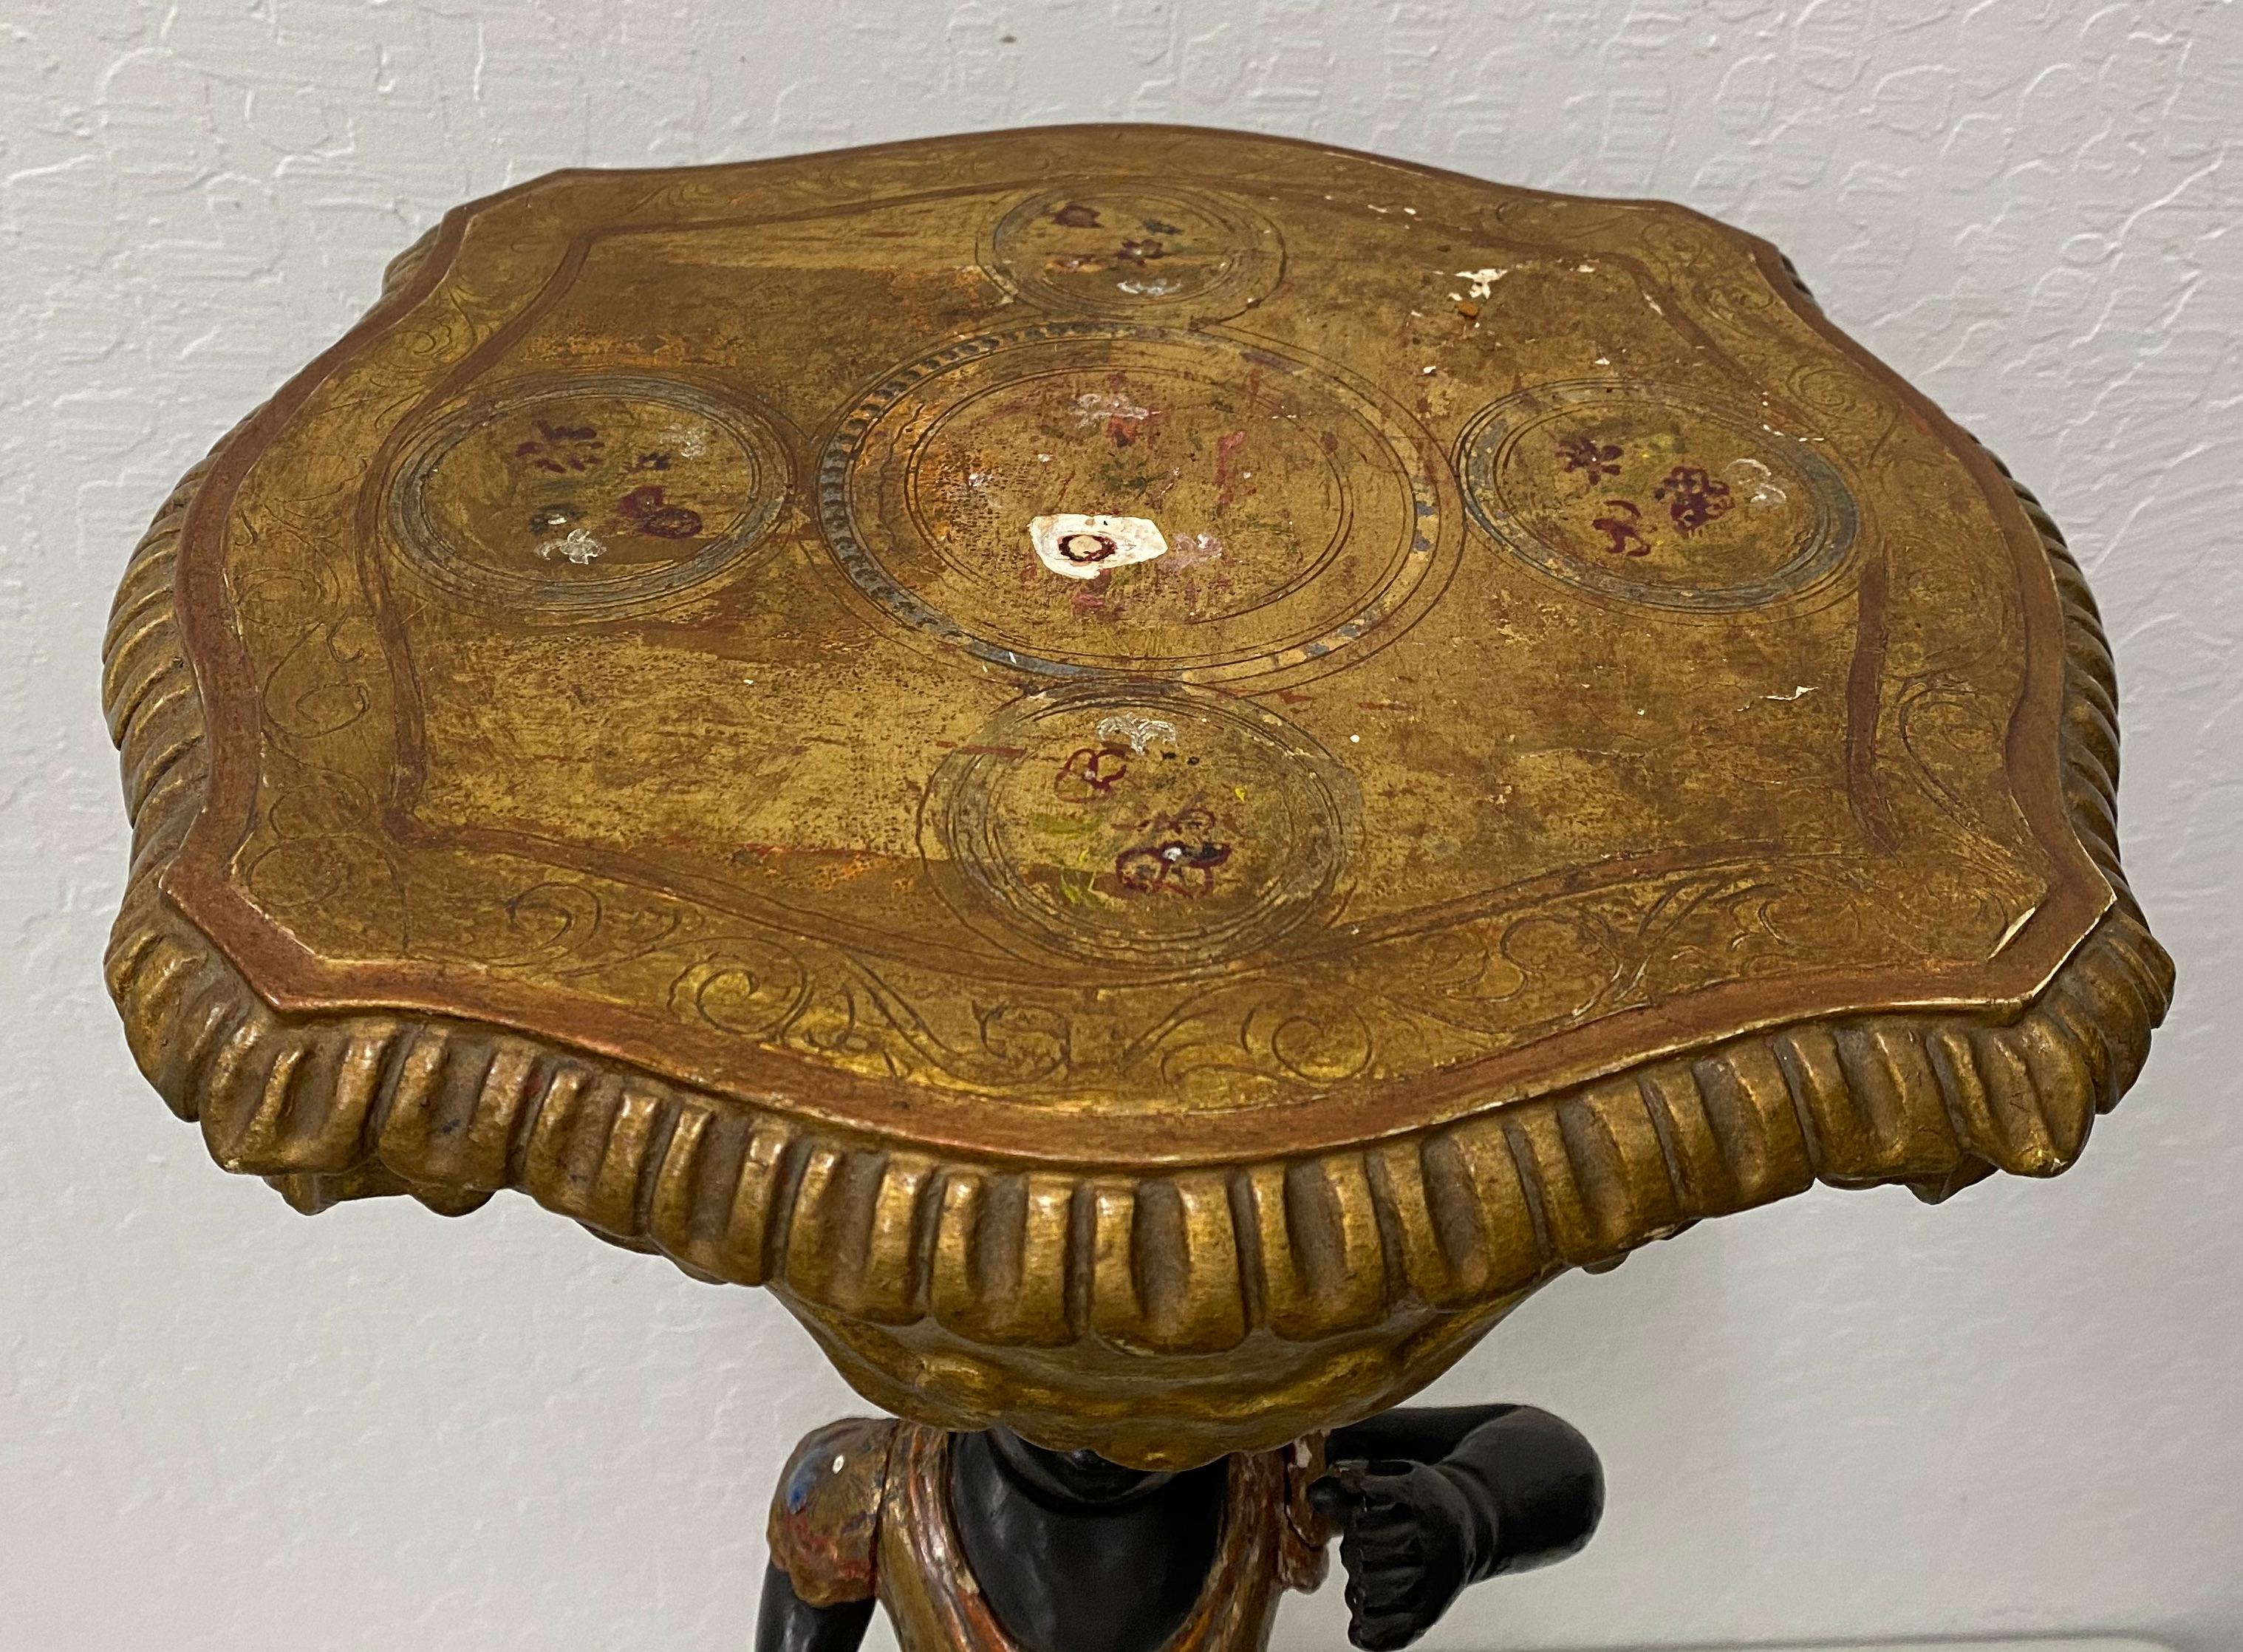 Mid-19th century carved gilded and painted plant stand

Fine old antique plant stand with ample remnants of original paint

The plant stand shows a few break and past repairs, but still retains much of its 19th century charm.

The figure